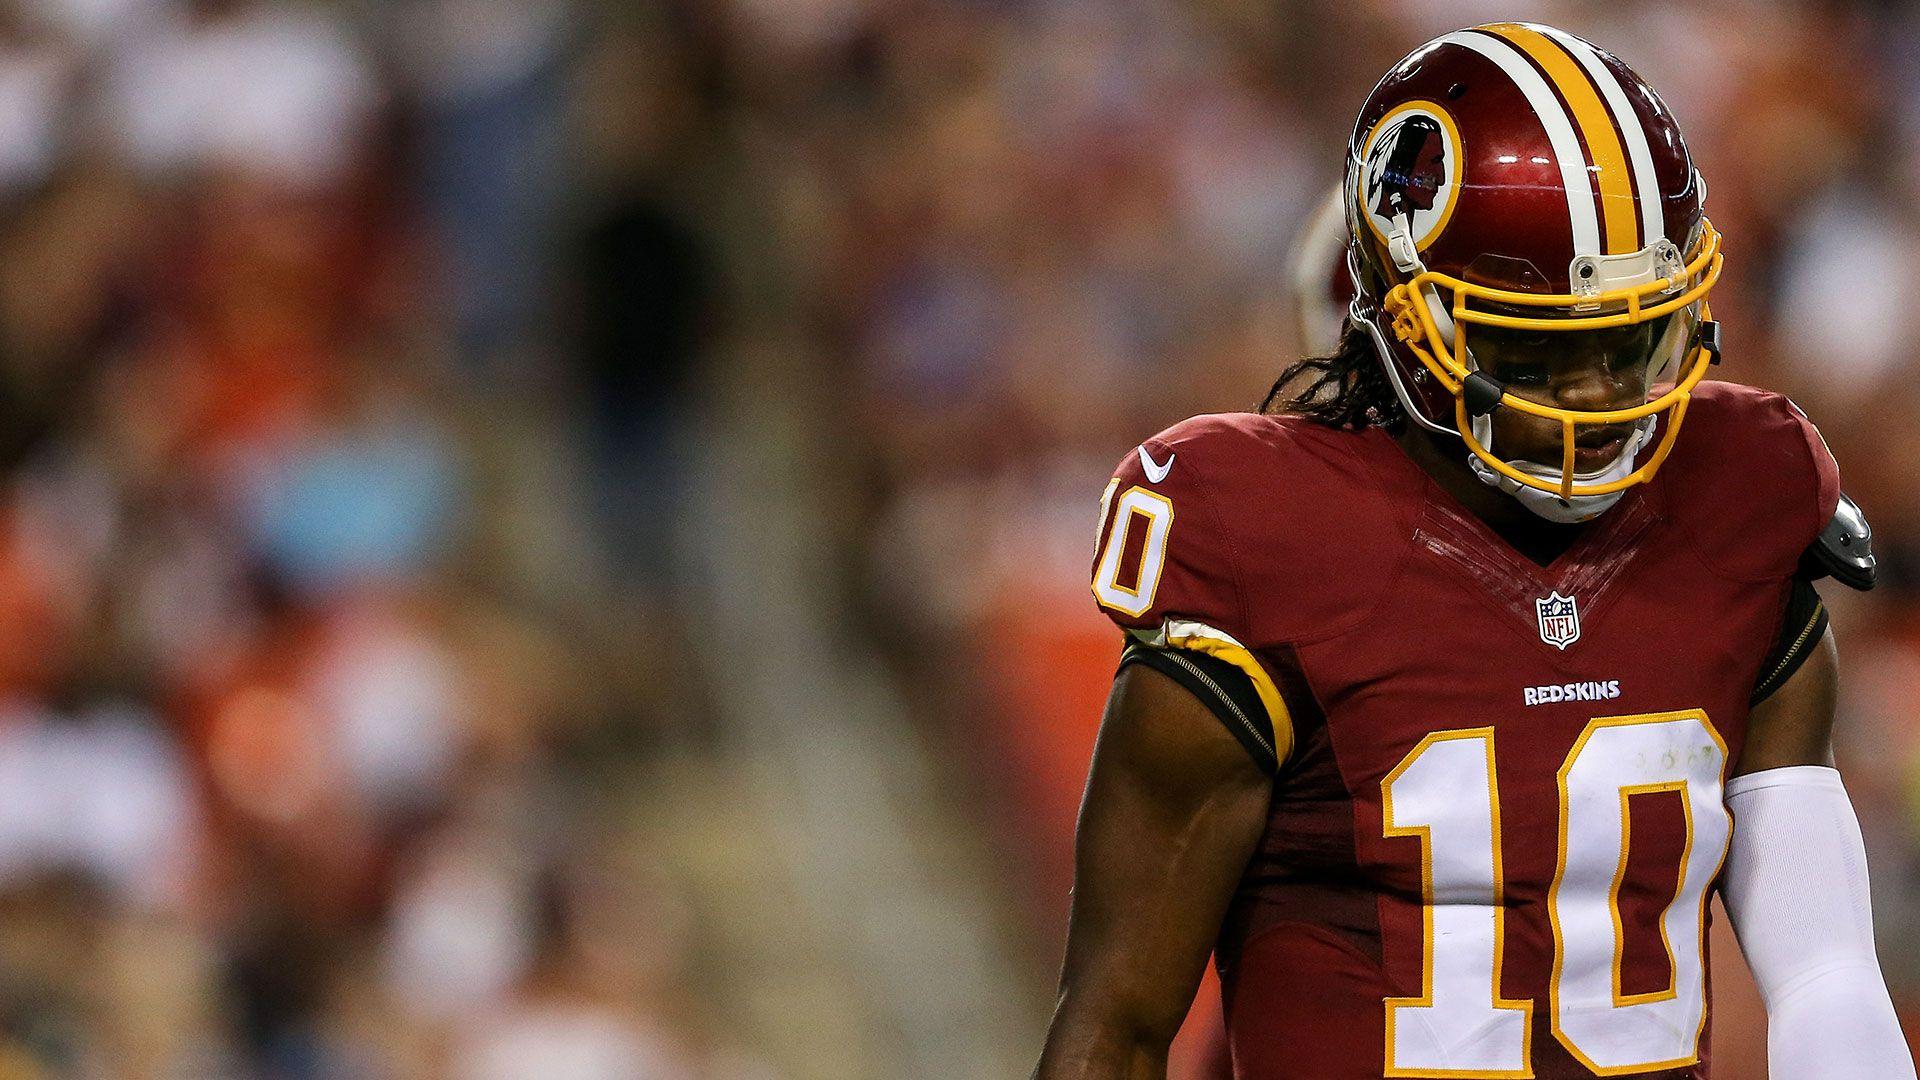 Will RGIII Get Another Chance to Play Football?